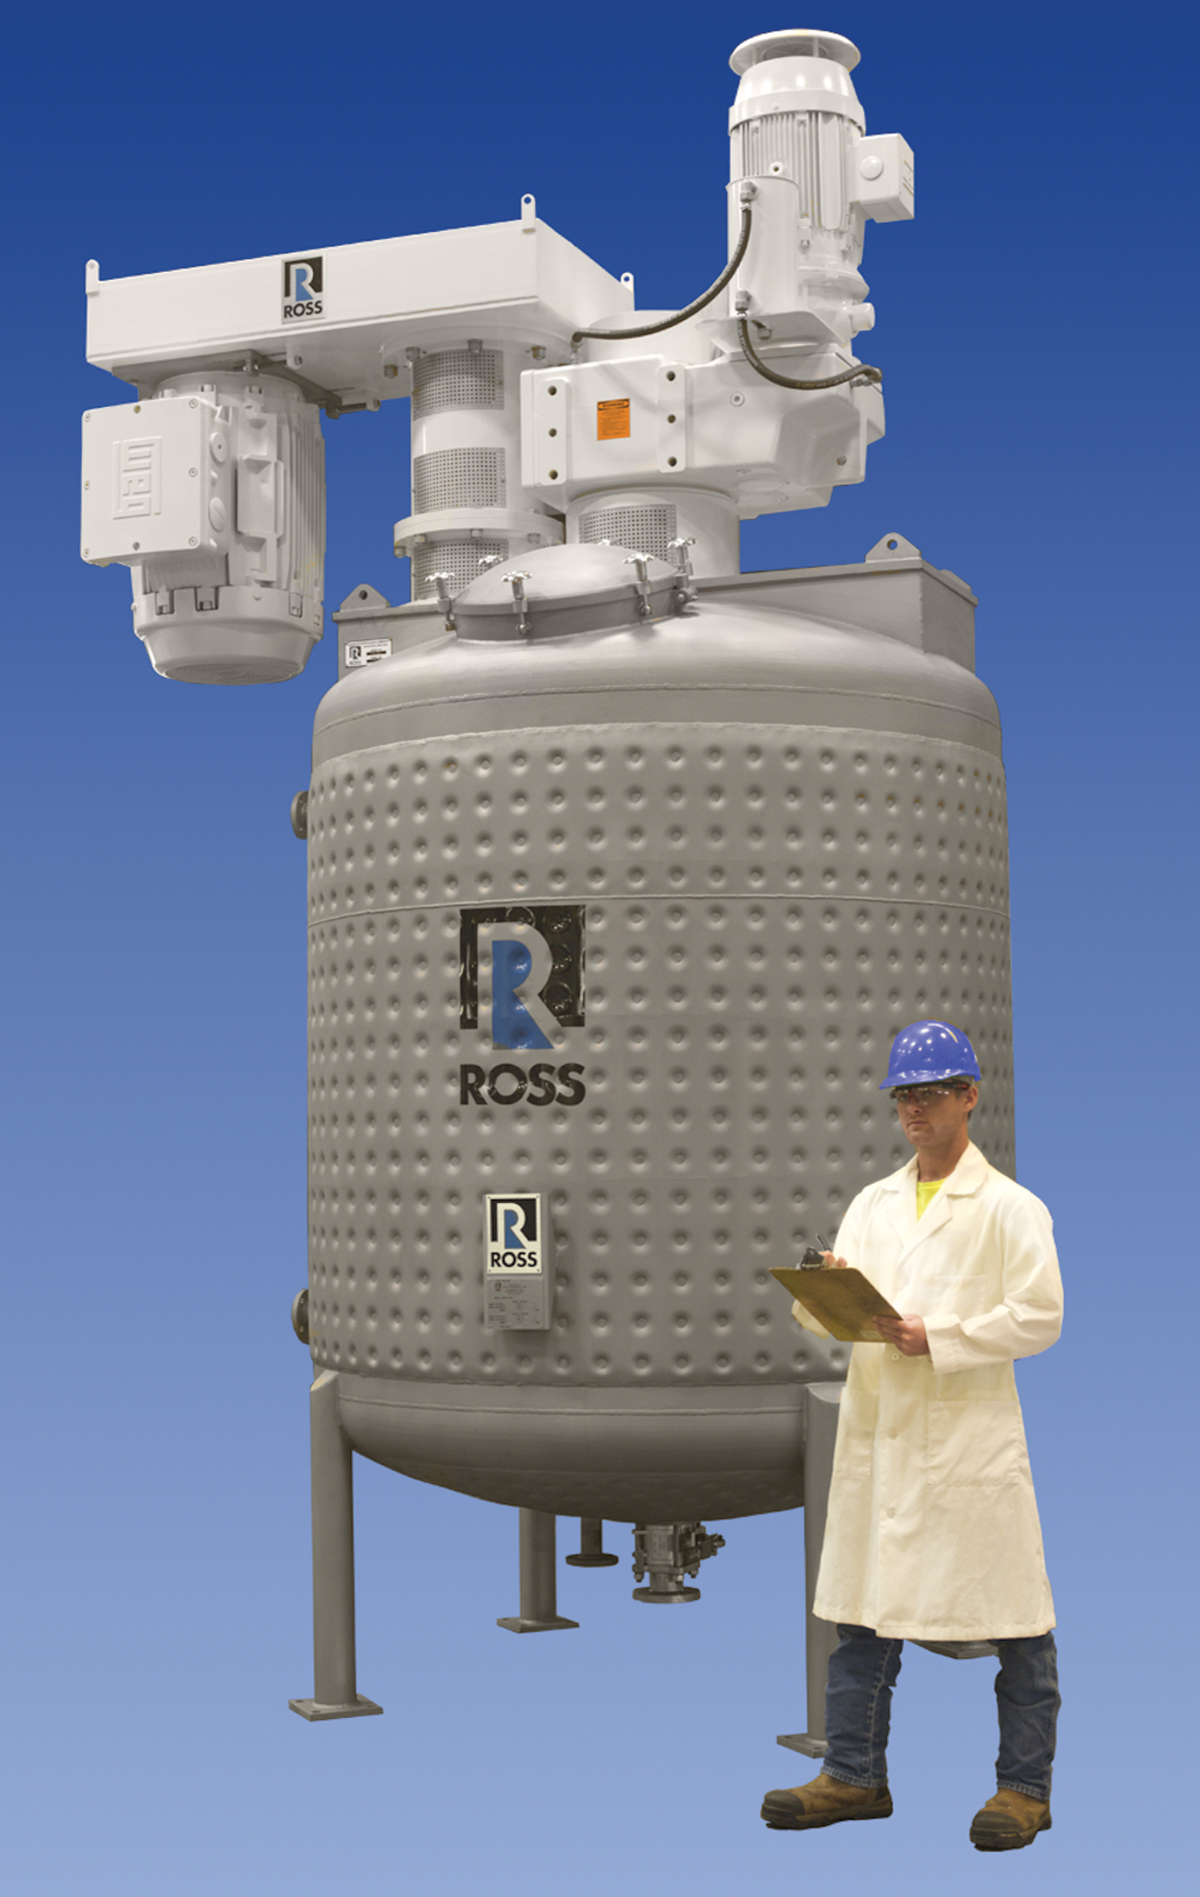 FDA-1500 dual-shaft mixer with a maximum capacity of 1,500 gallons, featuring a 150-hp high-speed disperser and a 40-hp two-wing anchor for processing high-viscosity dispersions and suspensions.